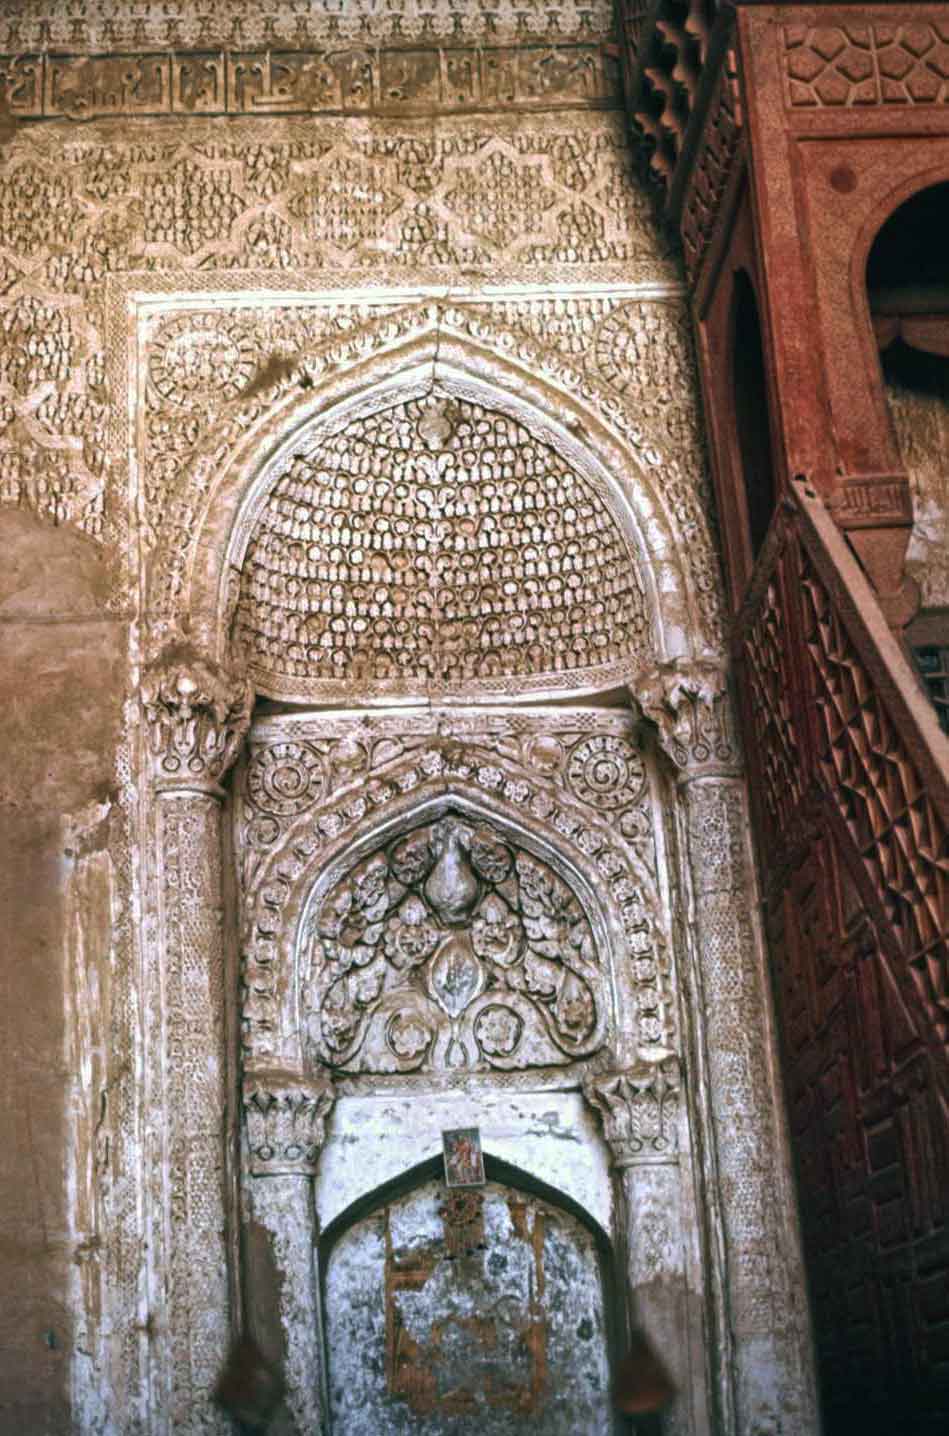 Carved, stucco mihrab, with partial view of the minbar